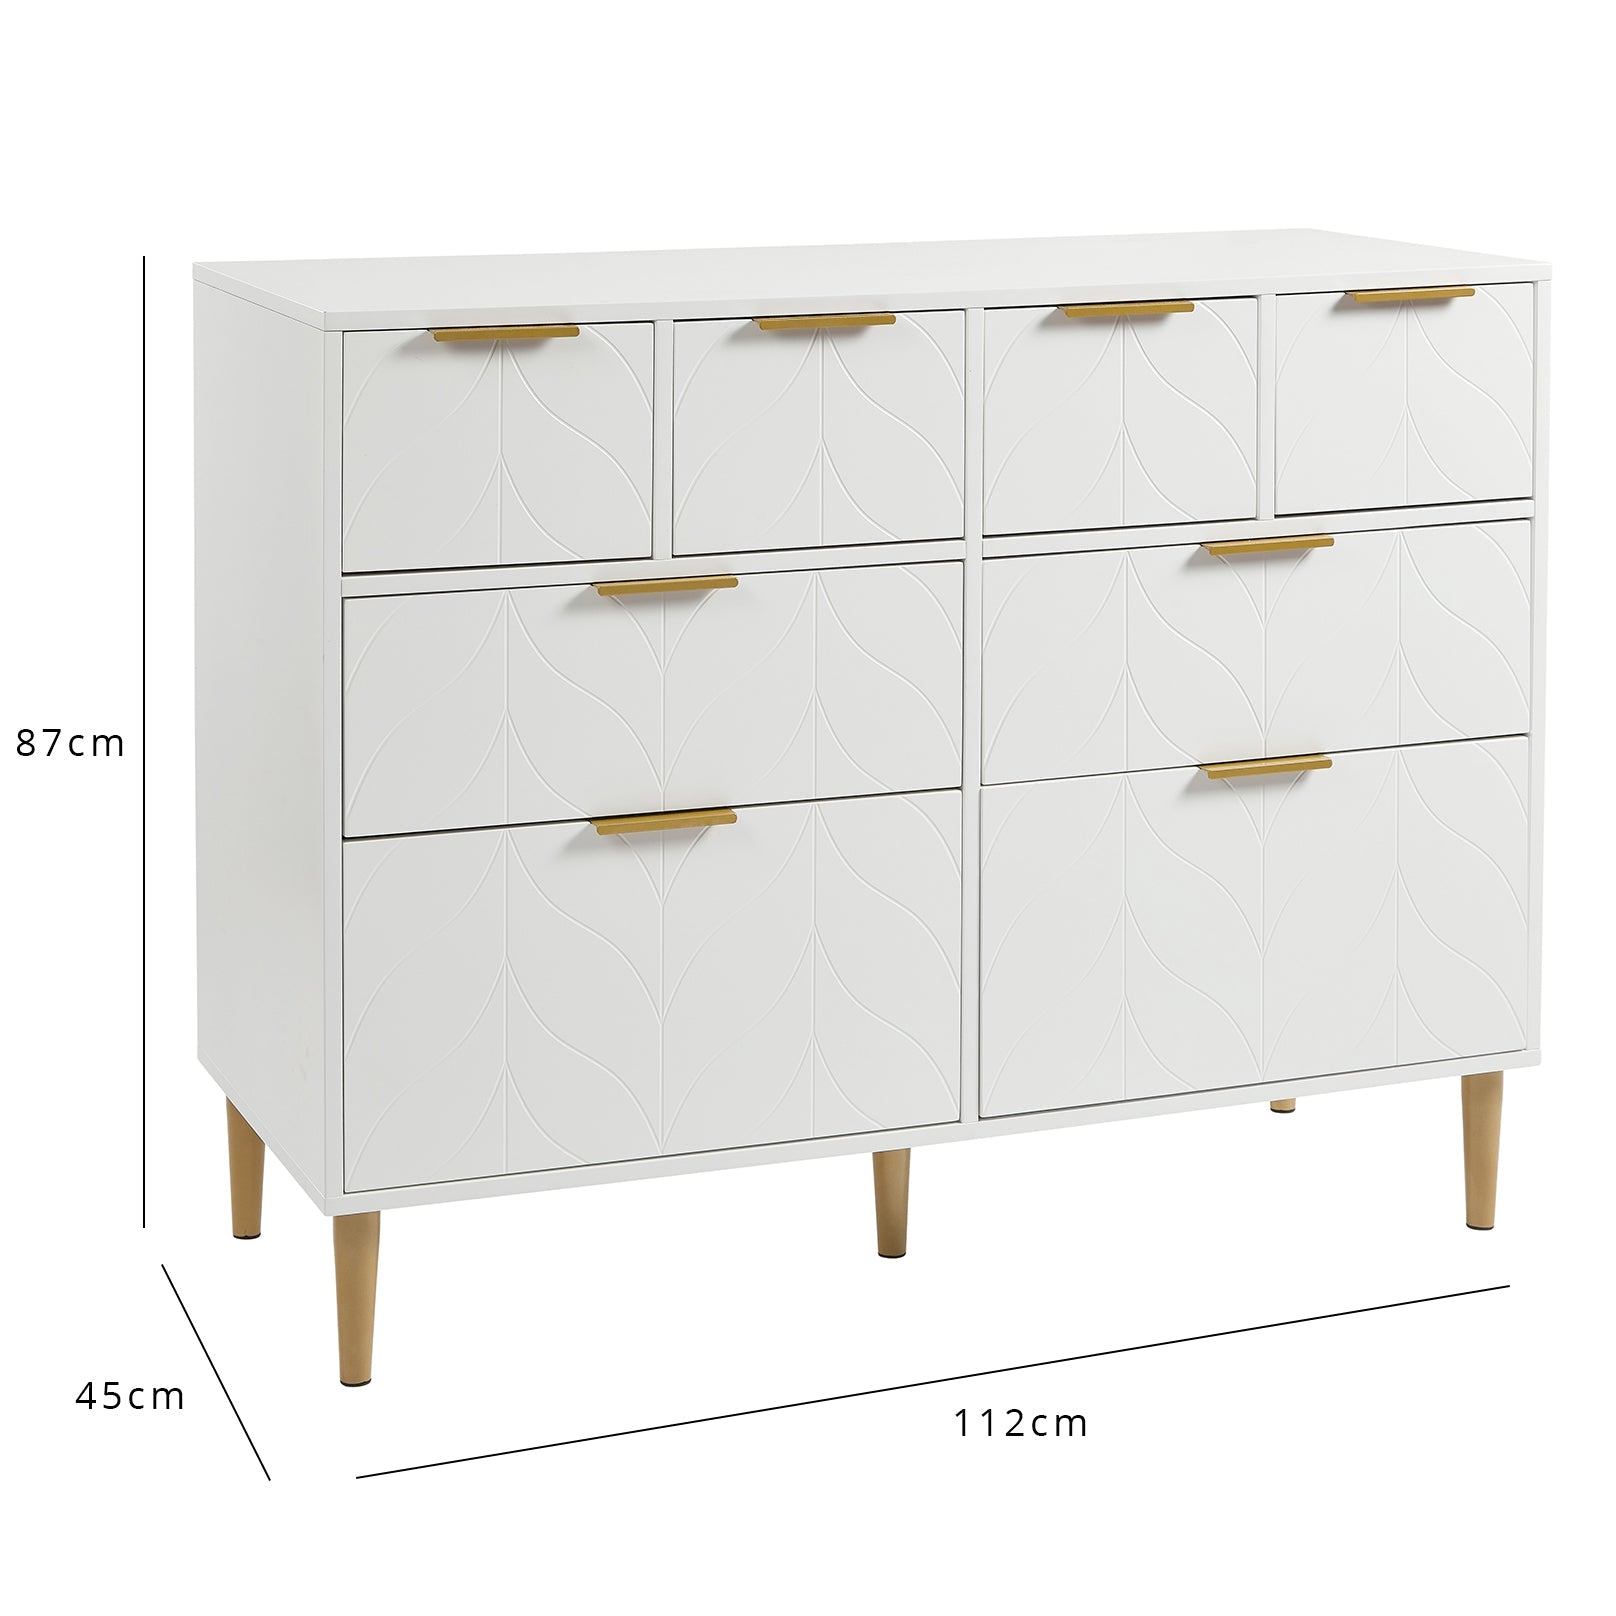 Gloria 4 piece bedroom furniture set - 4 over 4 chest of drawers -white - Laura James